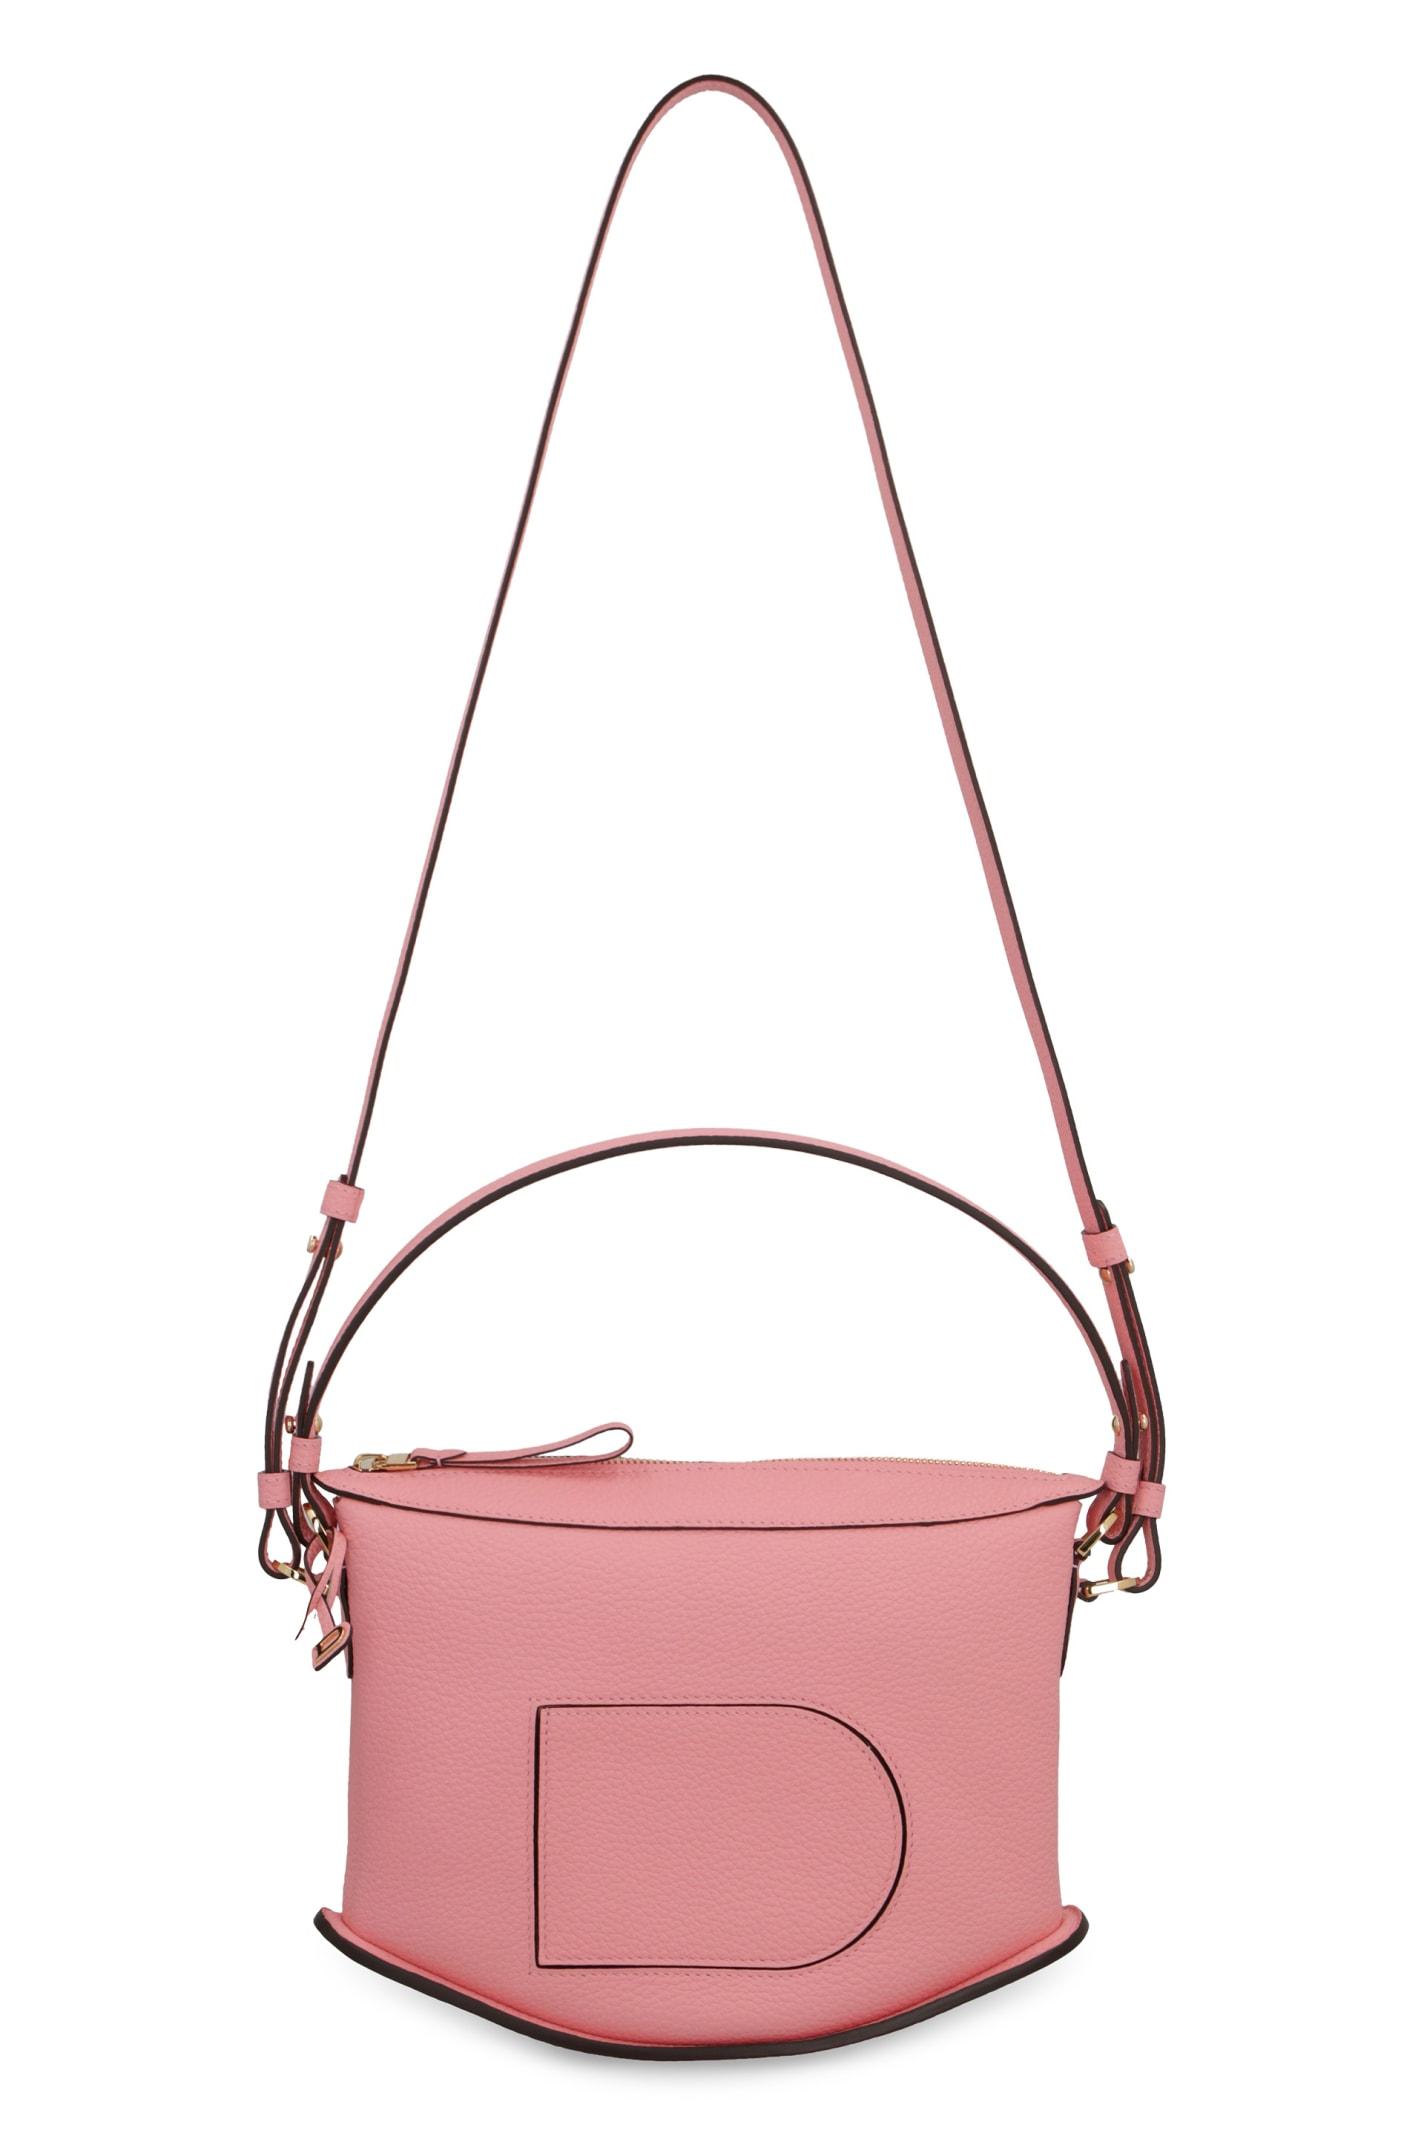 Delvaux Pin Swing Leather Handbag in Pink